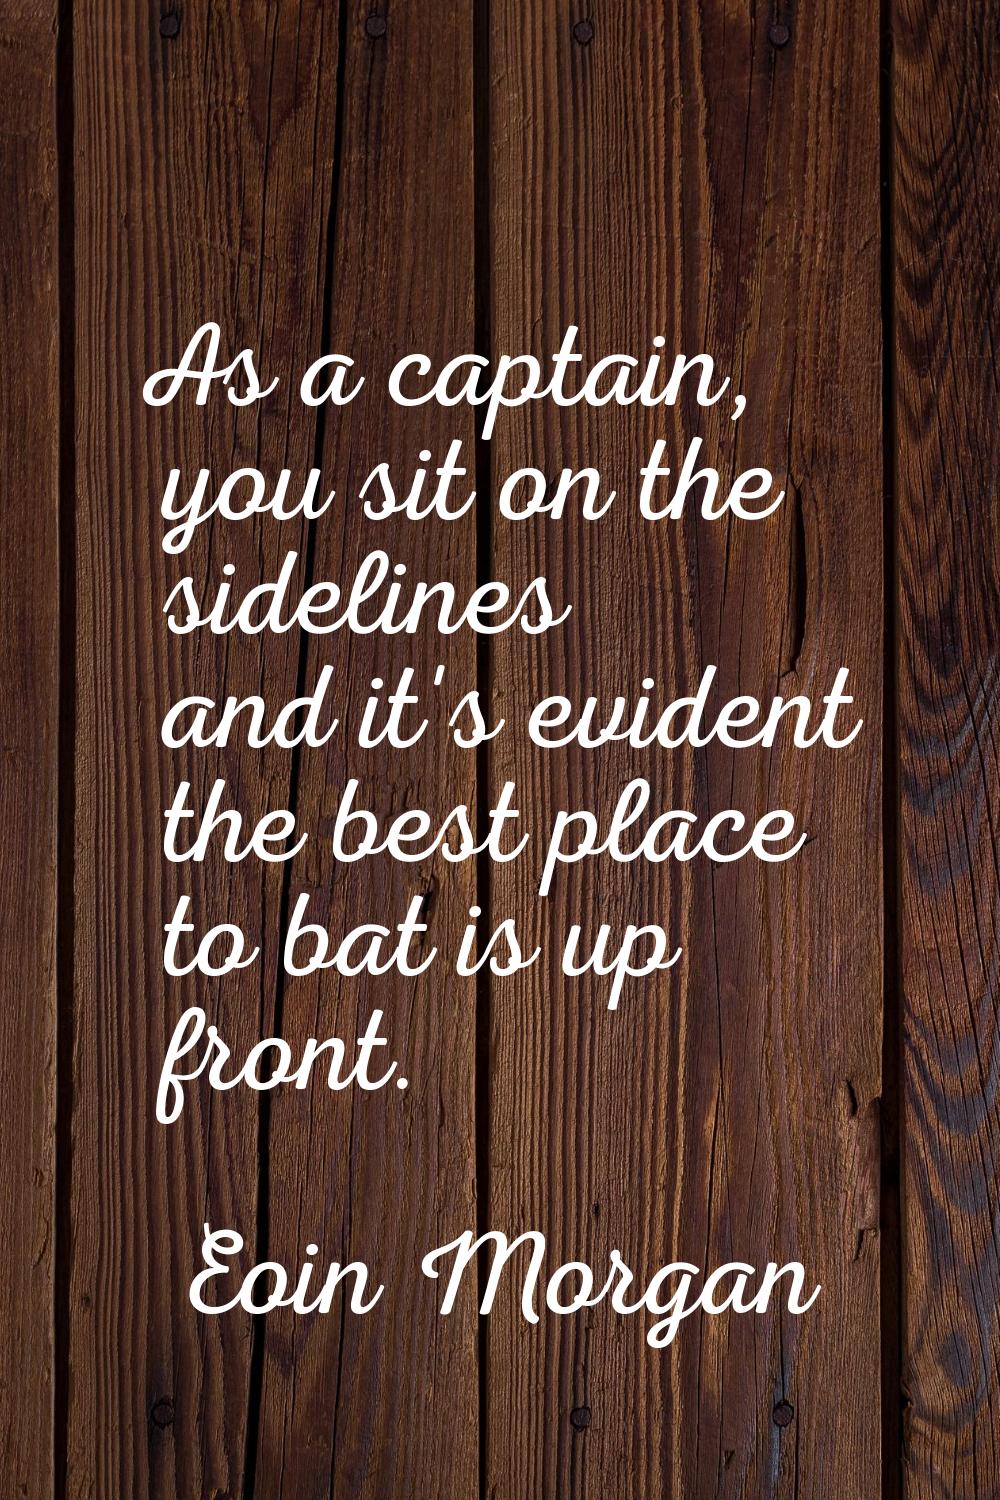 As a captain, you sit on the sidelines and it's evident the best place to bat is up front.